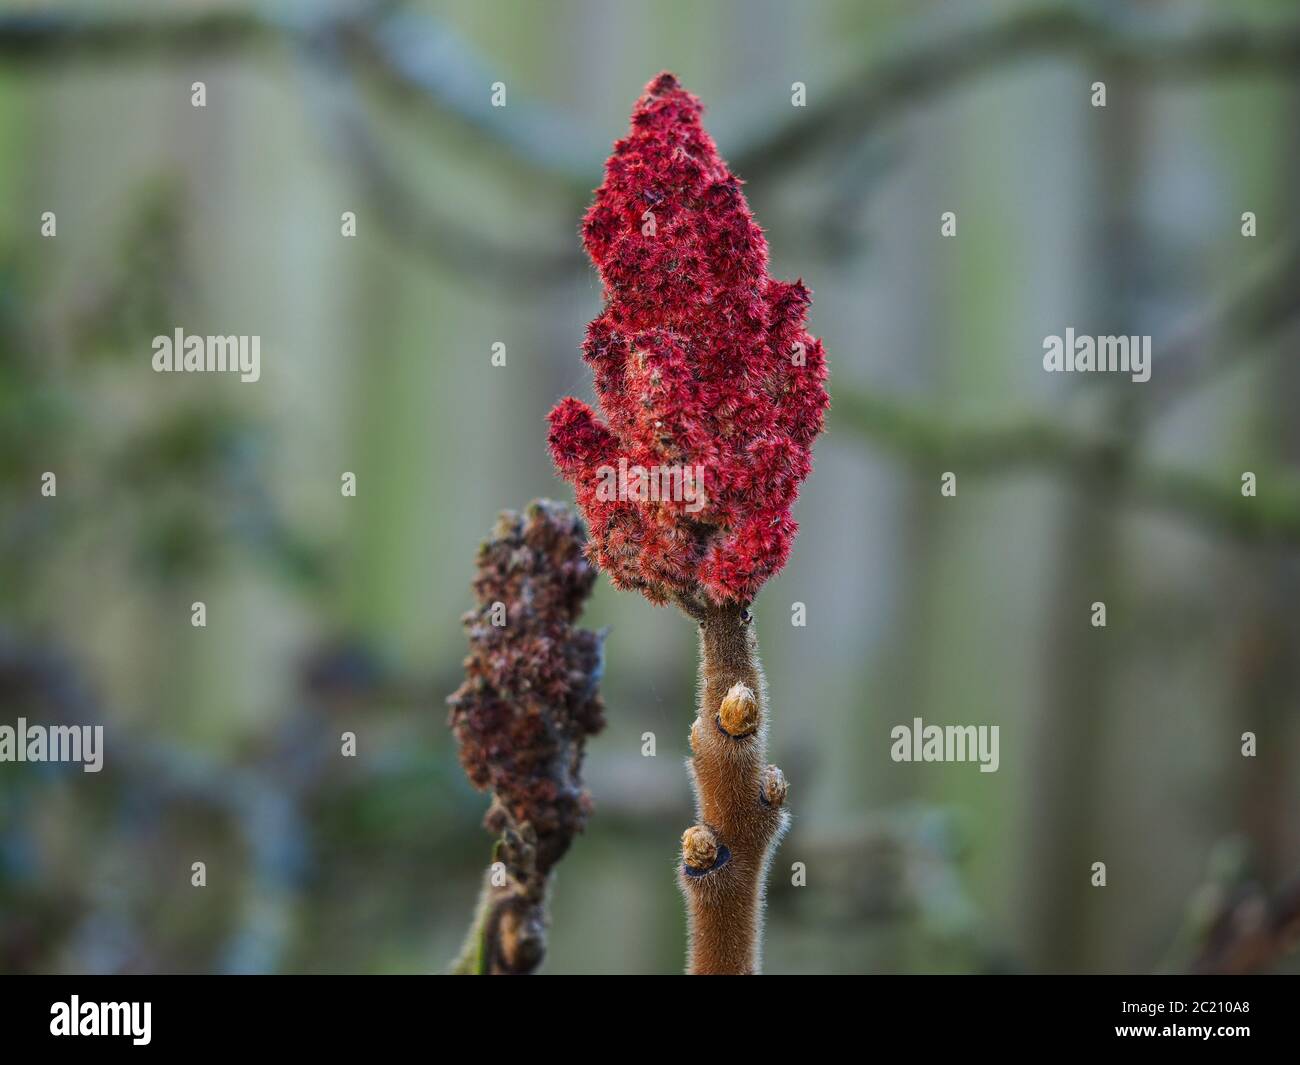 Closeup of a red flower spike of a Rhus typhina (staghorn sumac) tree in winter Stock Photo